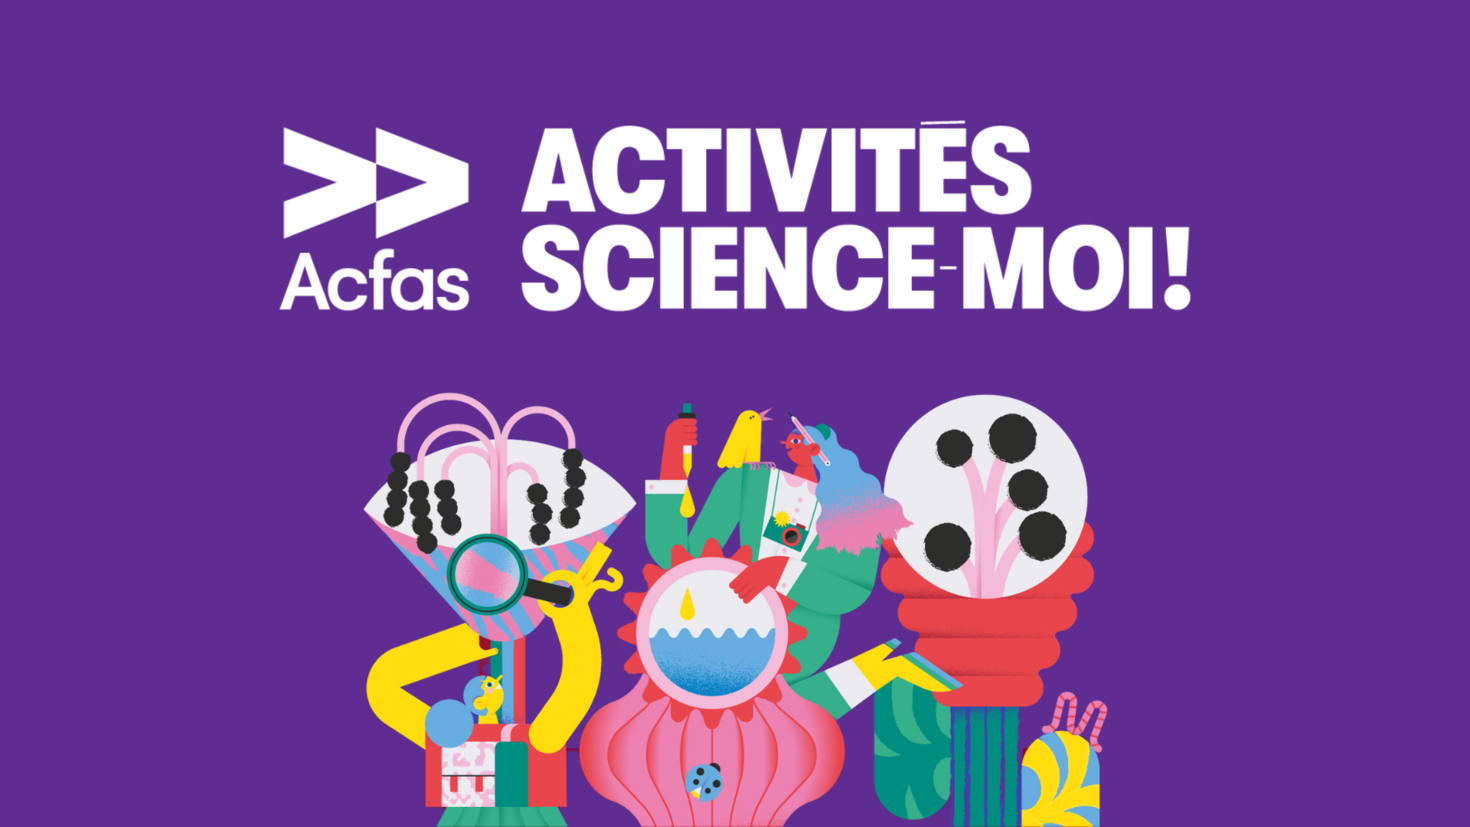 Vividly coloured illustration of characters nurturing giant exotic flowers. Text in French: "Acfas Activités Science-Moi!"